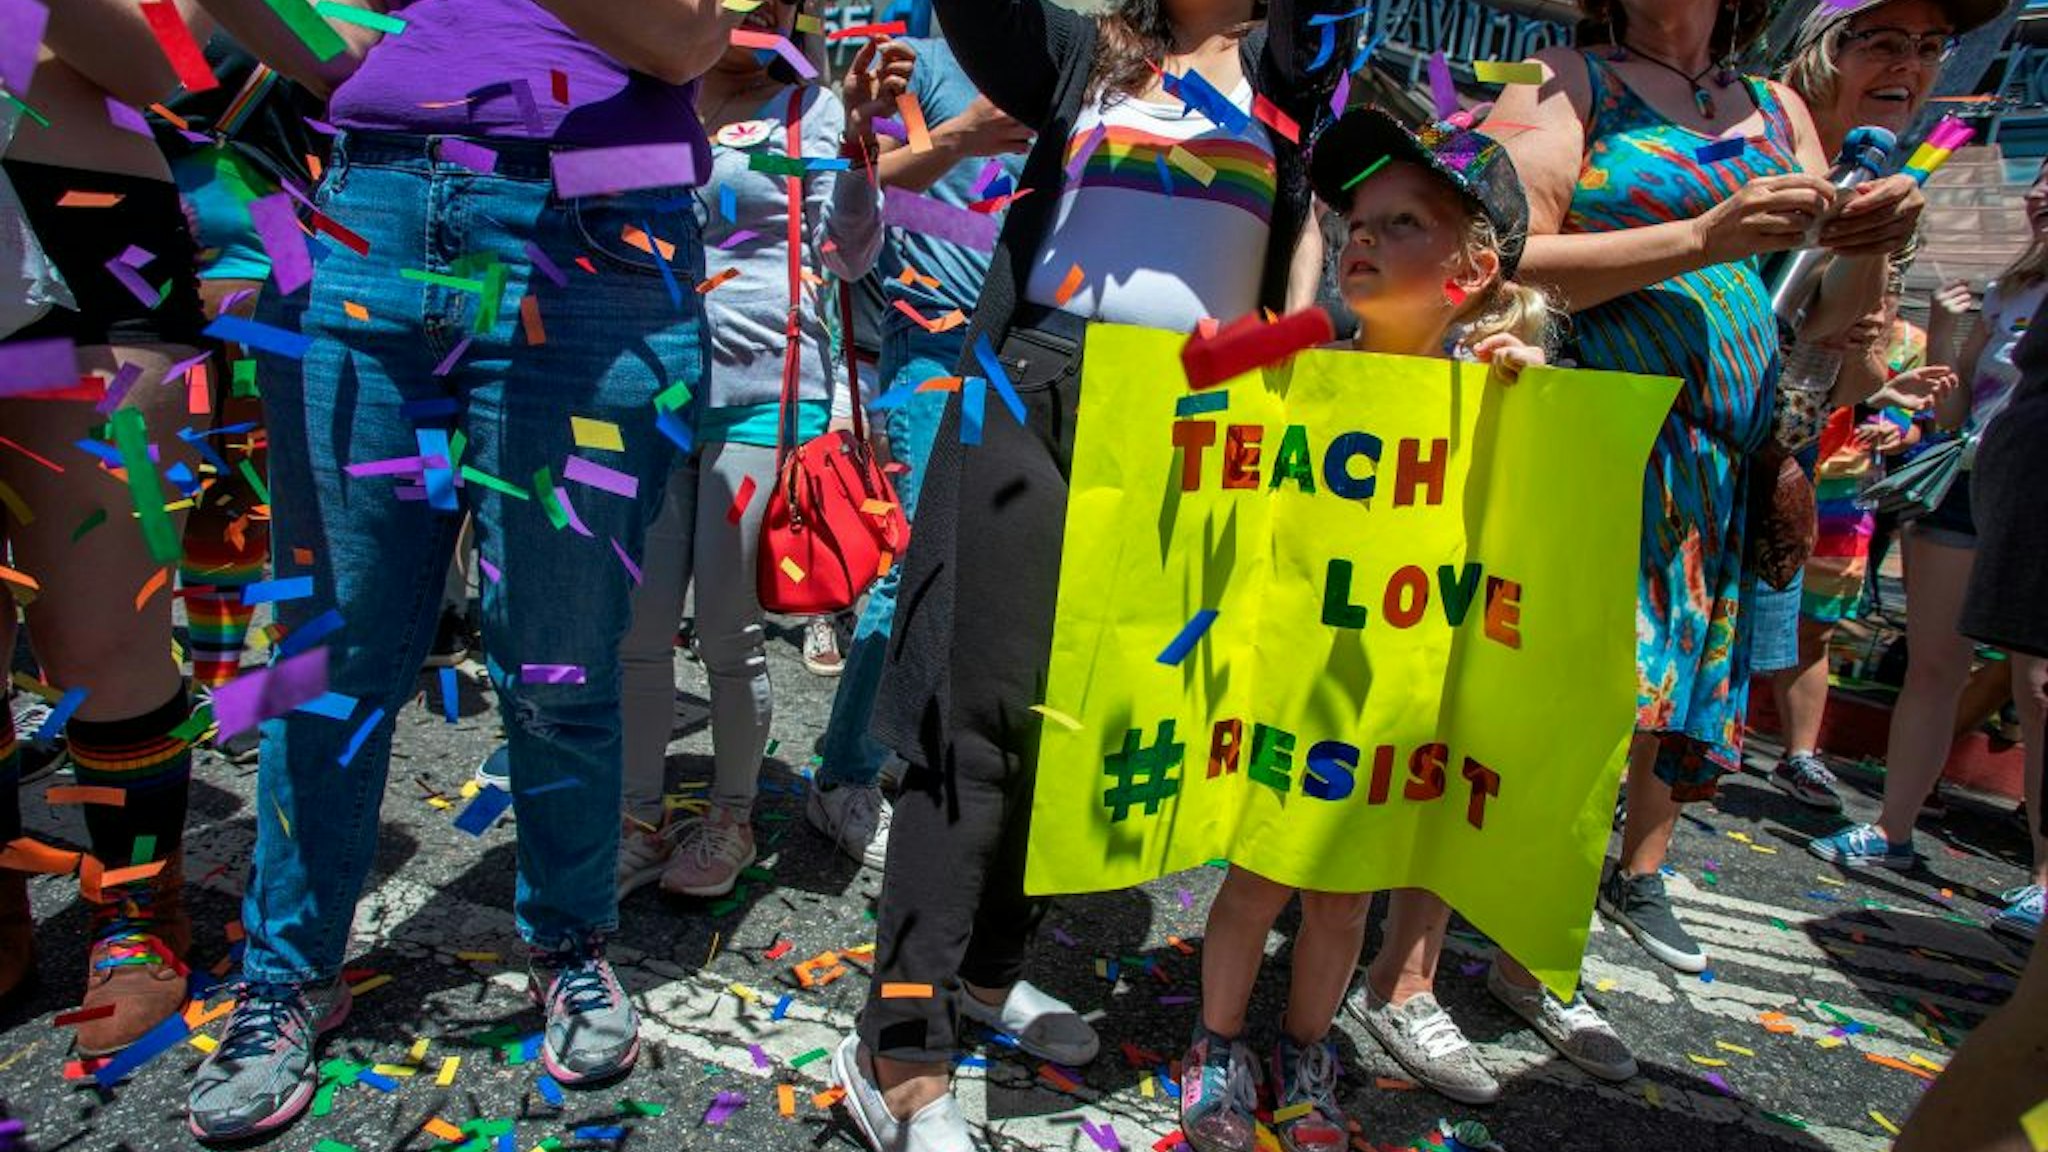 TOPSHOT - A young girl holds a sign during the annual LA Pride Parade in West Hollywood, California, on June 9, 2019. - LA Pride began on June 28, 1970, exactly one year after the historic Stonewall Rebellion in New York City, 50 years ago. (Photo by DAVID MCNEW / AFP) (Photo credit should read DAVID MCNEW/AFP via Getty Images)